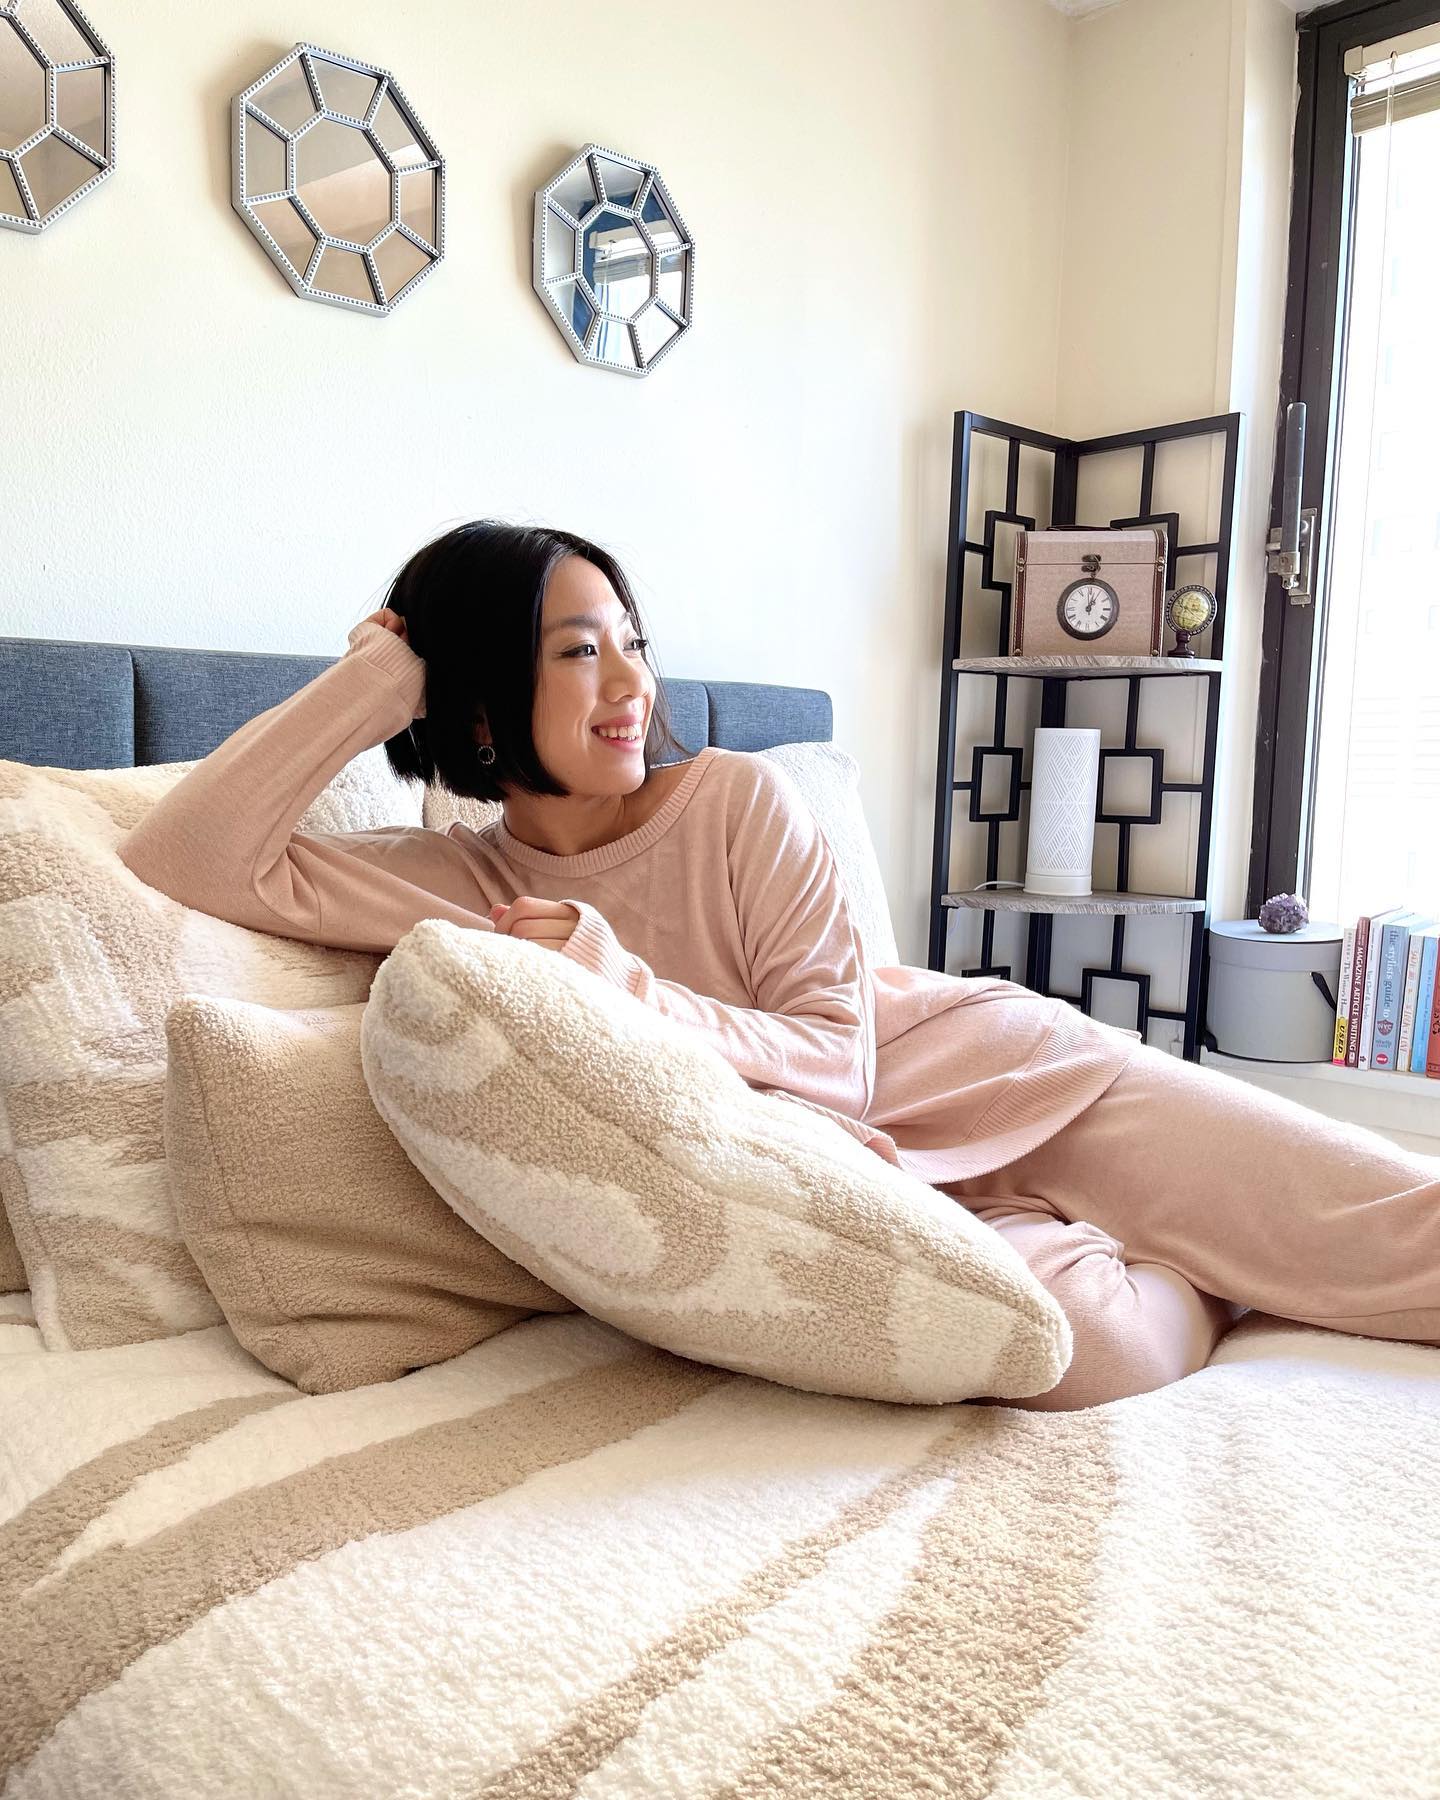 Woman smiling laying on bed. Woman lounging in loungewear. Woman lounging in pajamas. Woman smiling and relaxing on her bed.